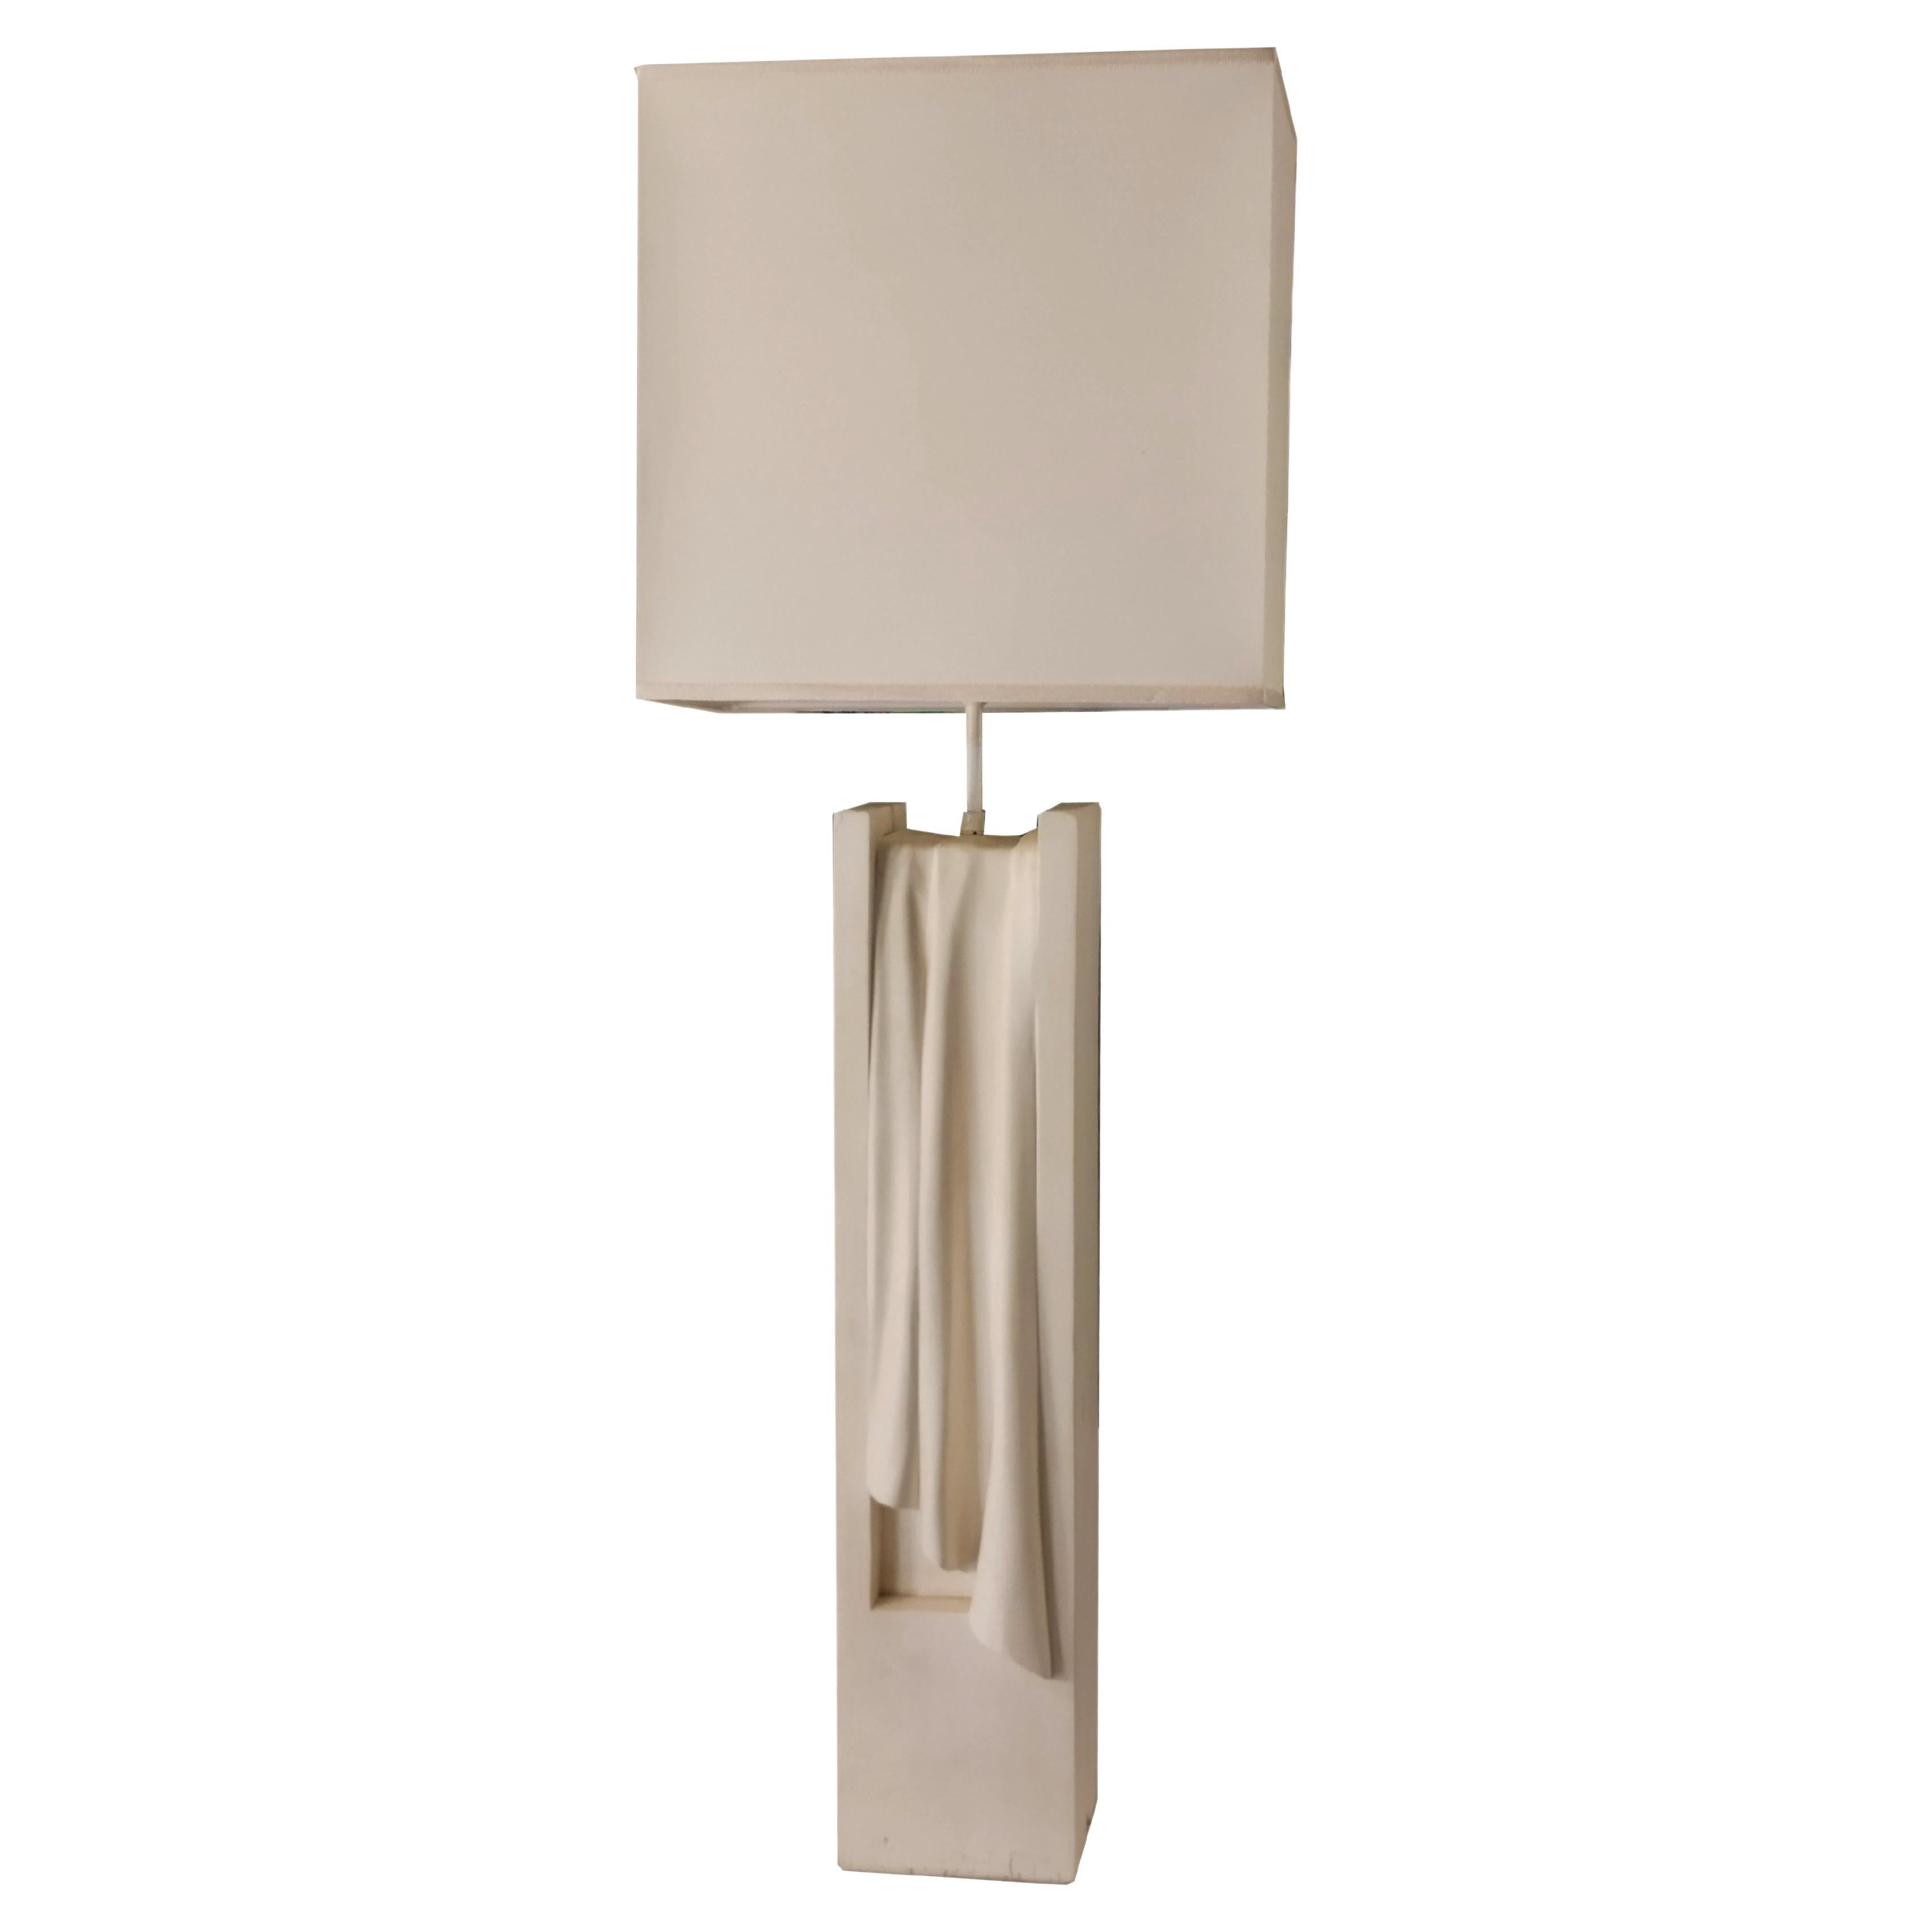 Annibale Oste for Atelier Sedap Sculptural Table Lamp, Italy 1980s For Sale